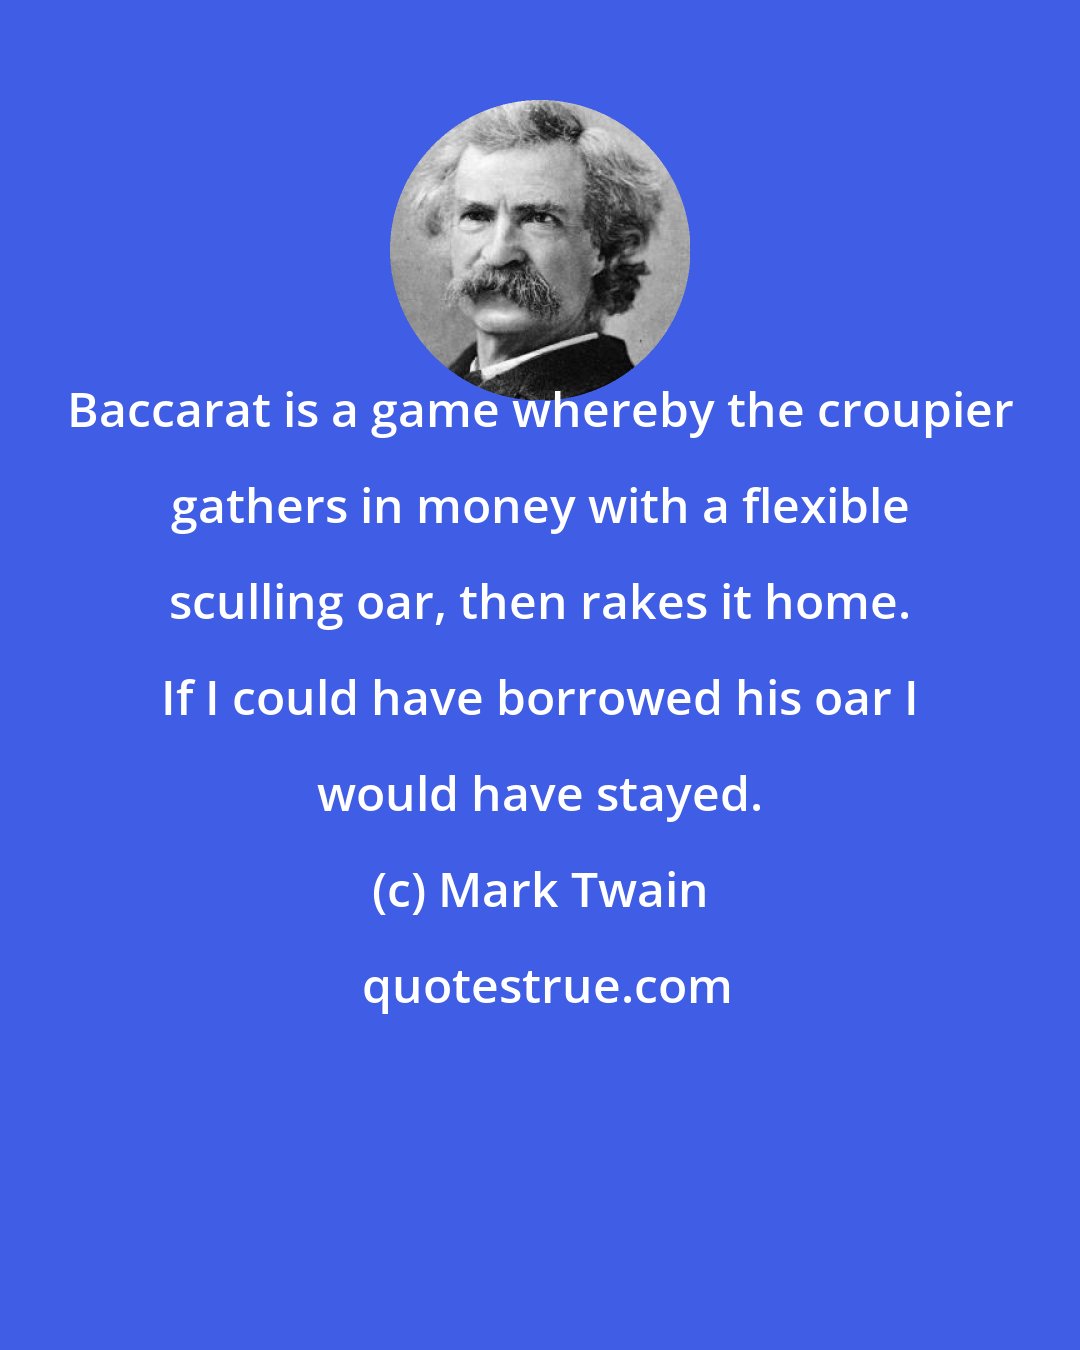 Mark Twain: Baccarat is a game whereby the croupier gathers in money with a flexible sculling oar, then rakes it home. If I could have borrowed his oar I would have stayed.